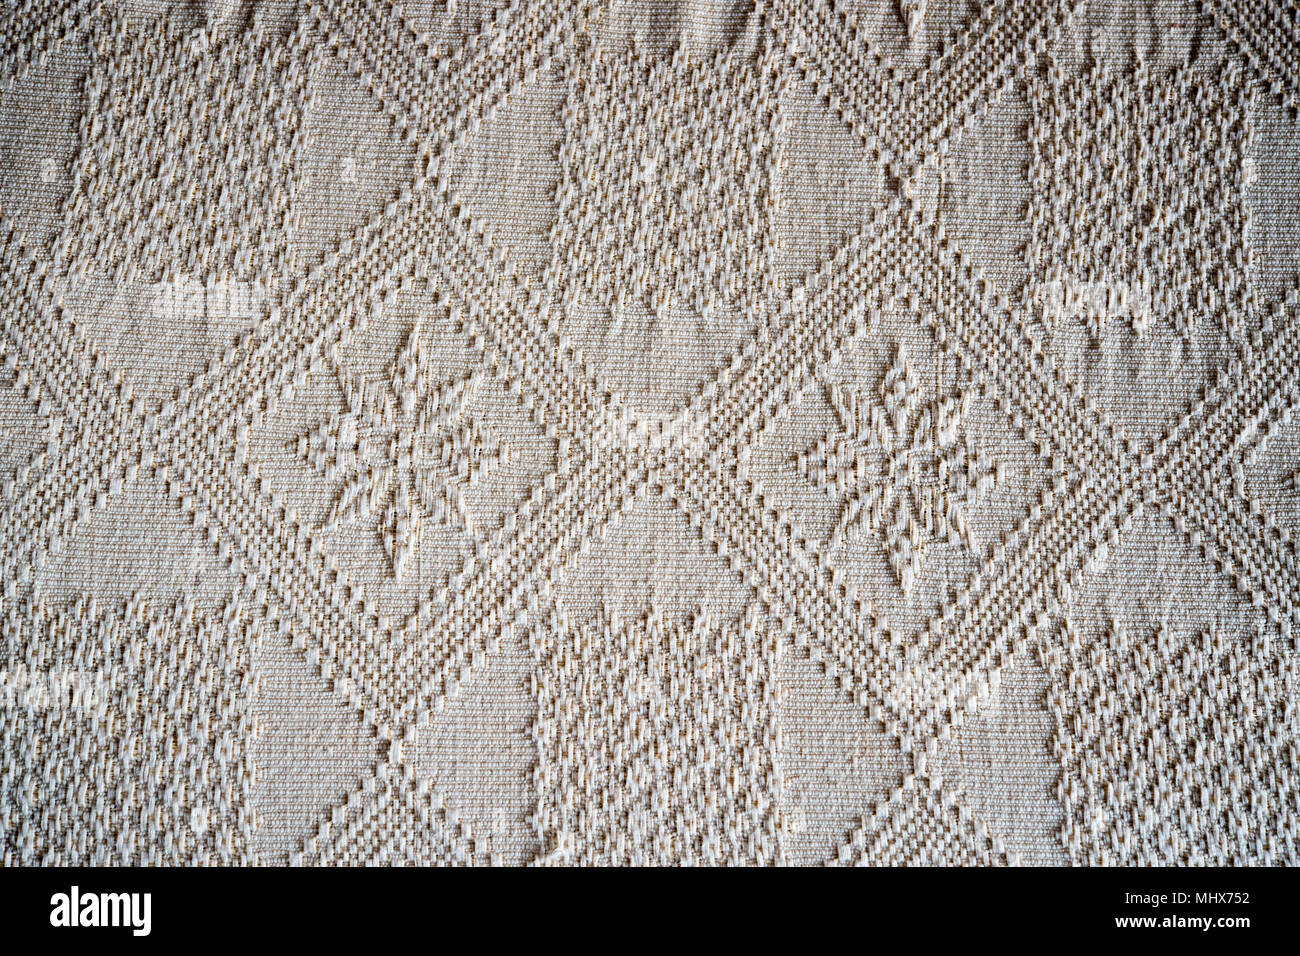 medieval fabric close up detail texture background Stock Photo - Alamy